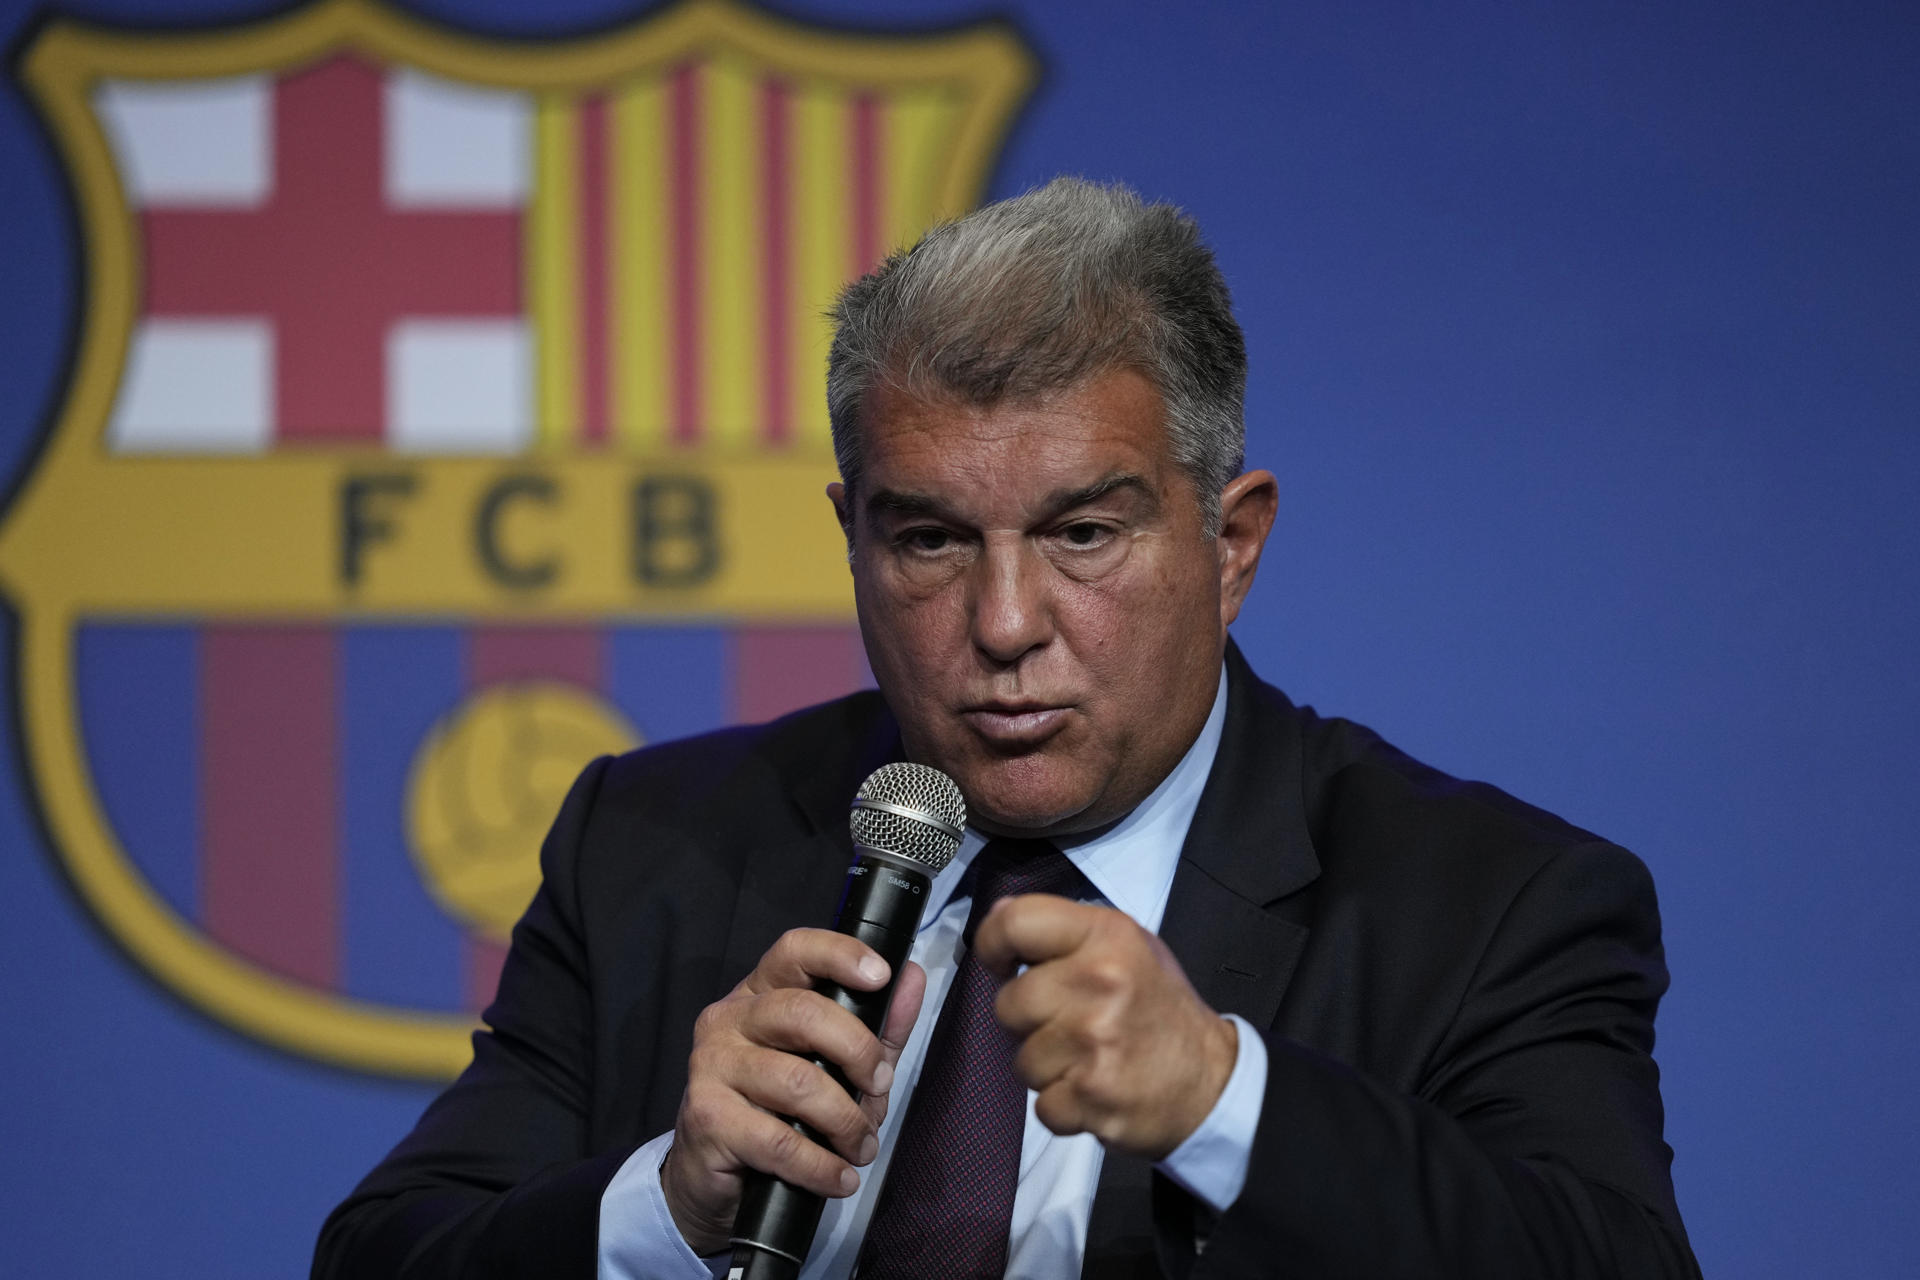 Barca president Laporta believes there is no need for signings: “We’ve very competitive squad"